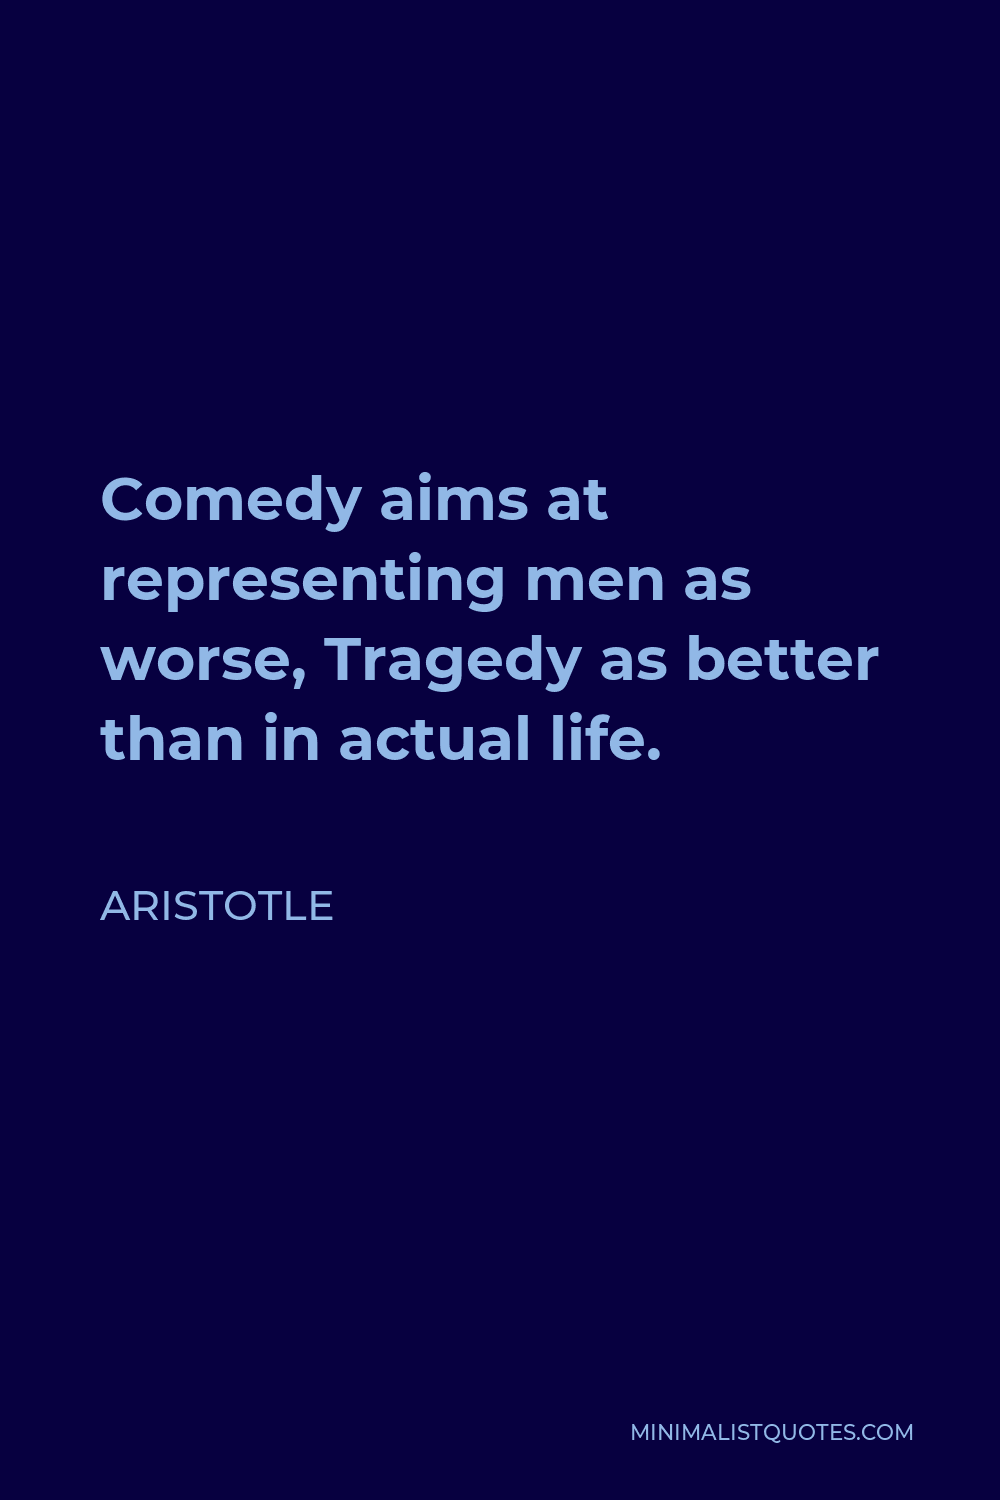 Aristotle Quote - Comedy aims at representing men as worse, Tragedy as better than in actual life.